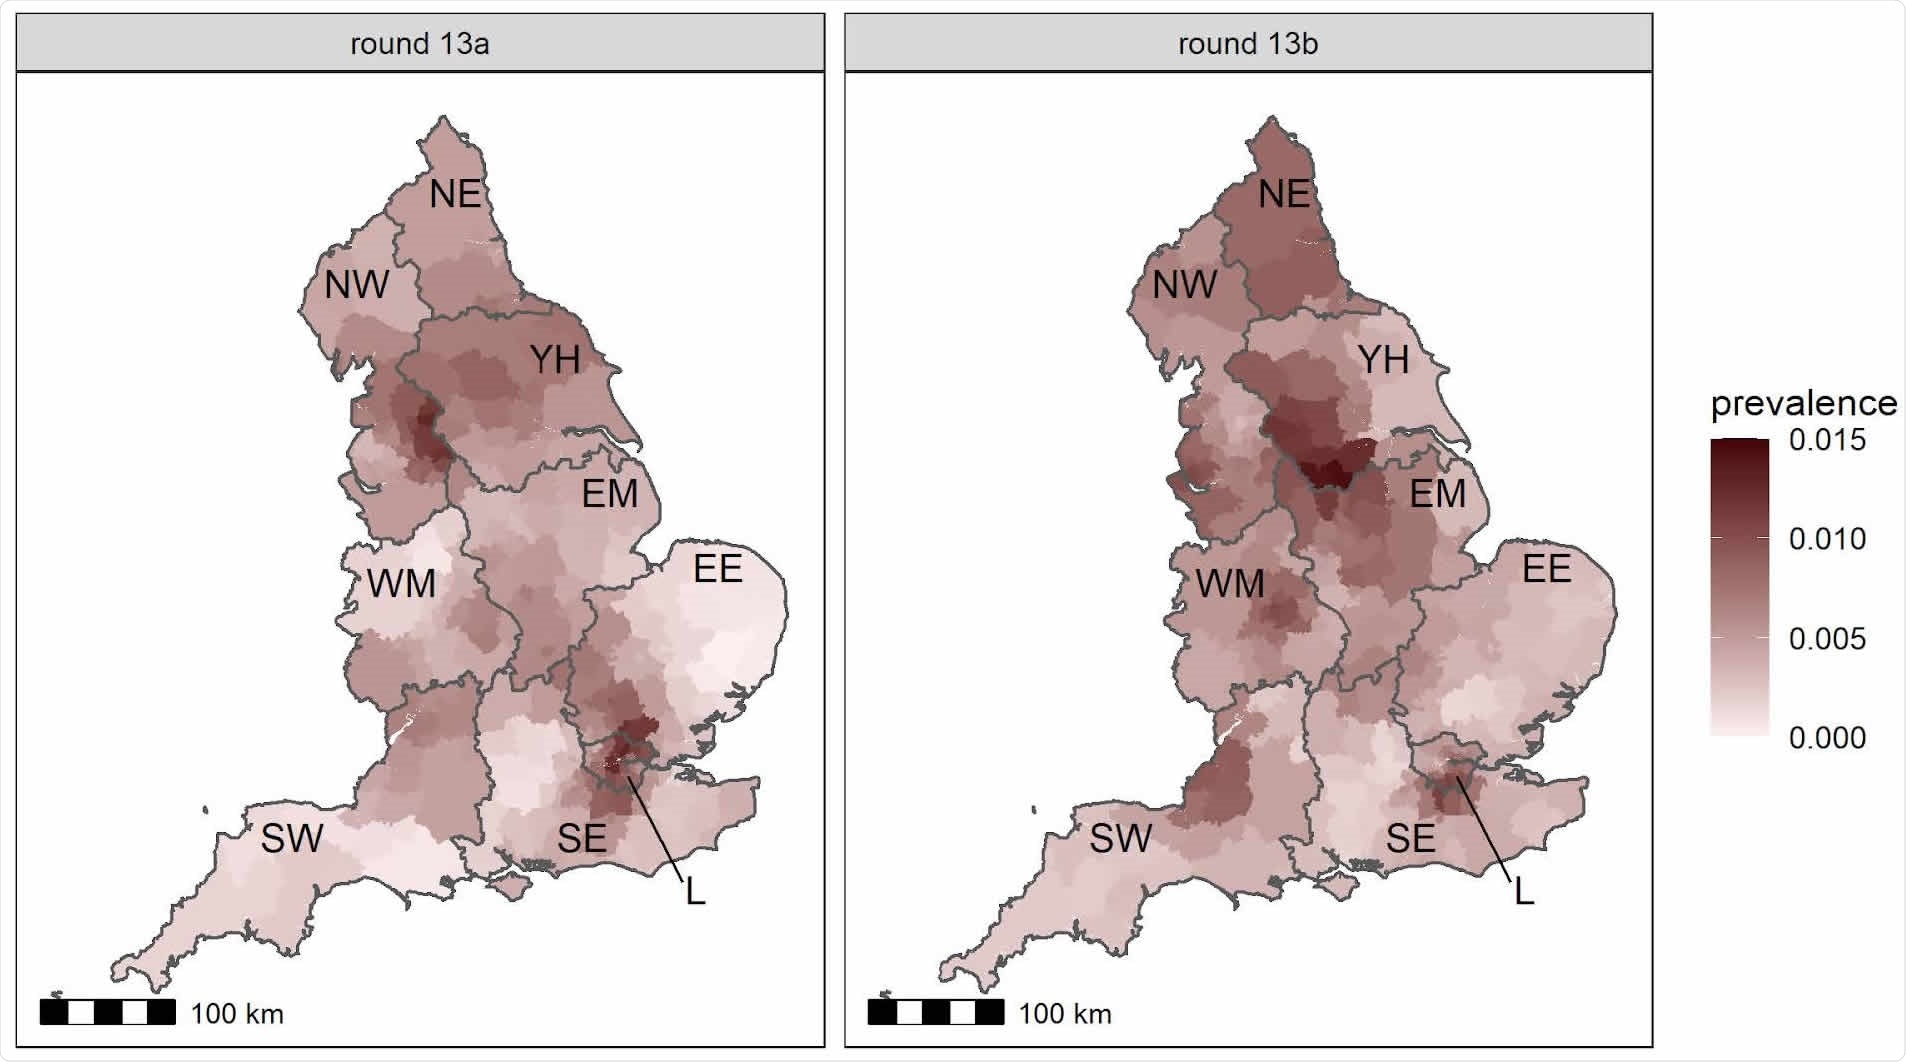 Neighbourhood smoothed average prevalence by lower tier local area for (A) round 13a and (B) round 13b. Neighbourhood prevalence calculated from nearest neighbours (the median number of neighbours within 30 km in the study). Average neighbourhood prevalence displayed for individual lower-tier local authorities. Regions: NE = North East, NW = North West, YH = Yorkshire and The Humber, EM = East Midlands, WM = West Midlands, EE = East of England, L = London, SE = South East, SW = South West.